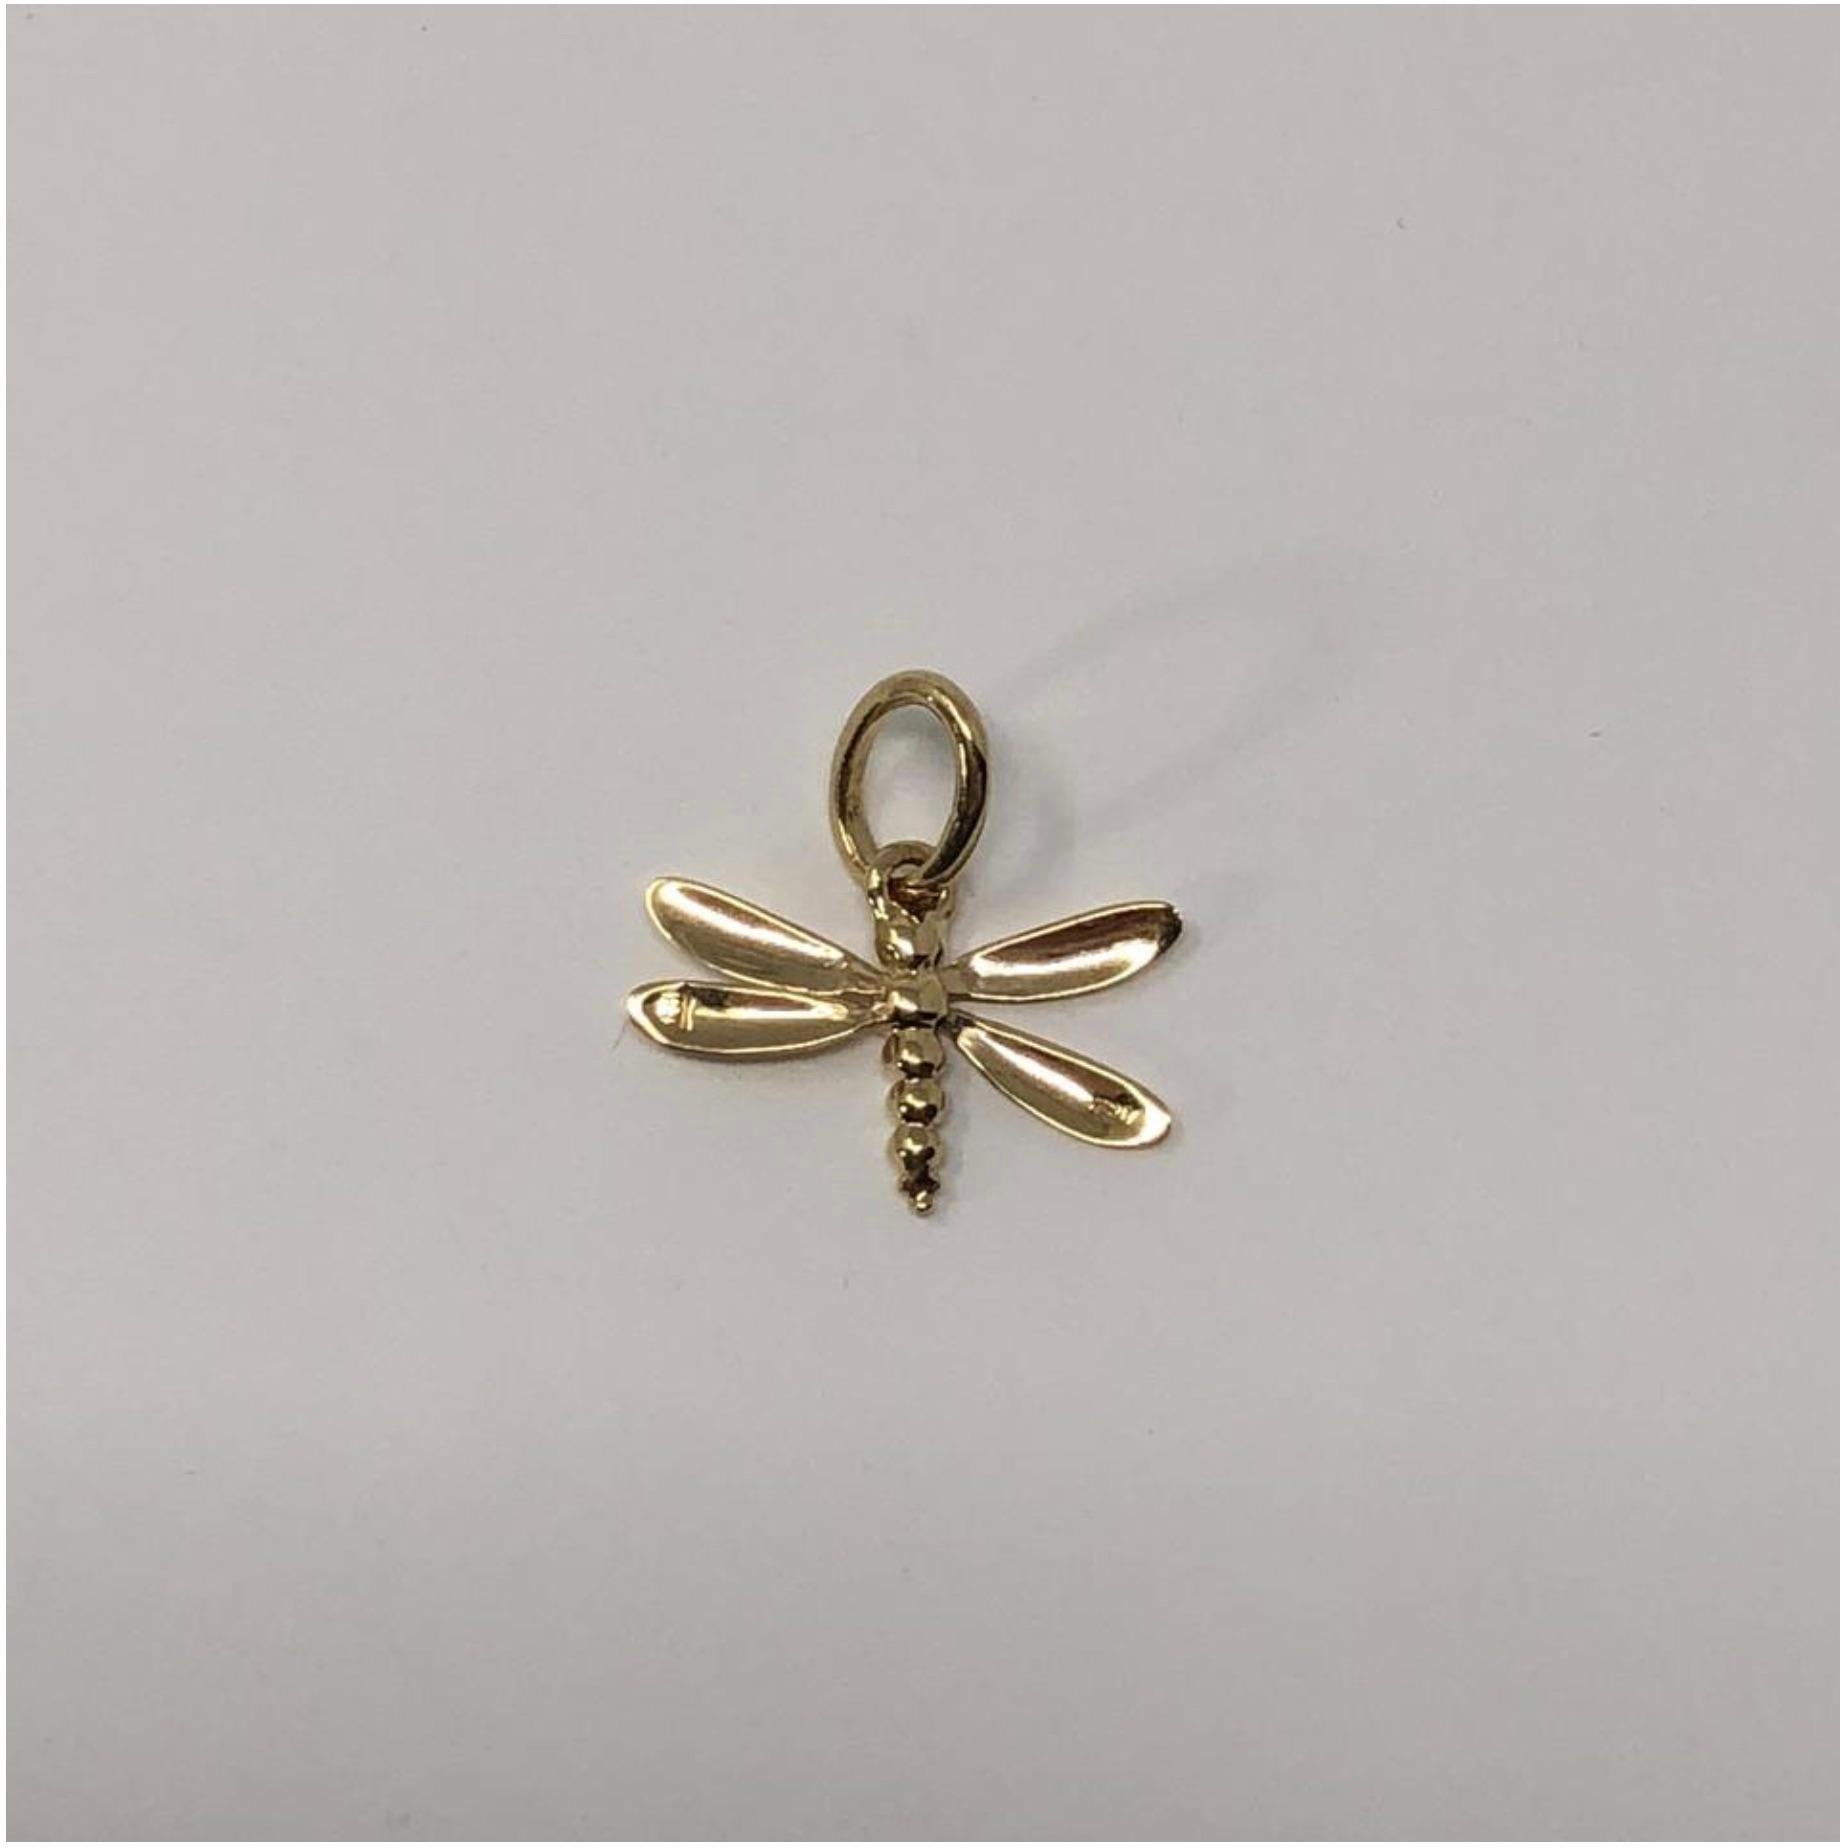 MODEL - Temple St Clair 18k Charm - Dragonfly

CONDITION - Exceptional! No signs of wear.

SKU - 2328

ORIGINAL RETAIL PRICE - $495 + tax

MATERIAL - 18k Gold

WEIGHT - 1 grams

DIMENSIONS - L28mm x H12mm (18mm with Jump Ring) x D2mm

COMES WITH -